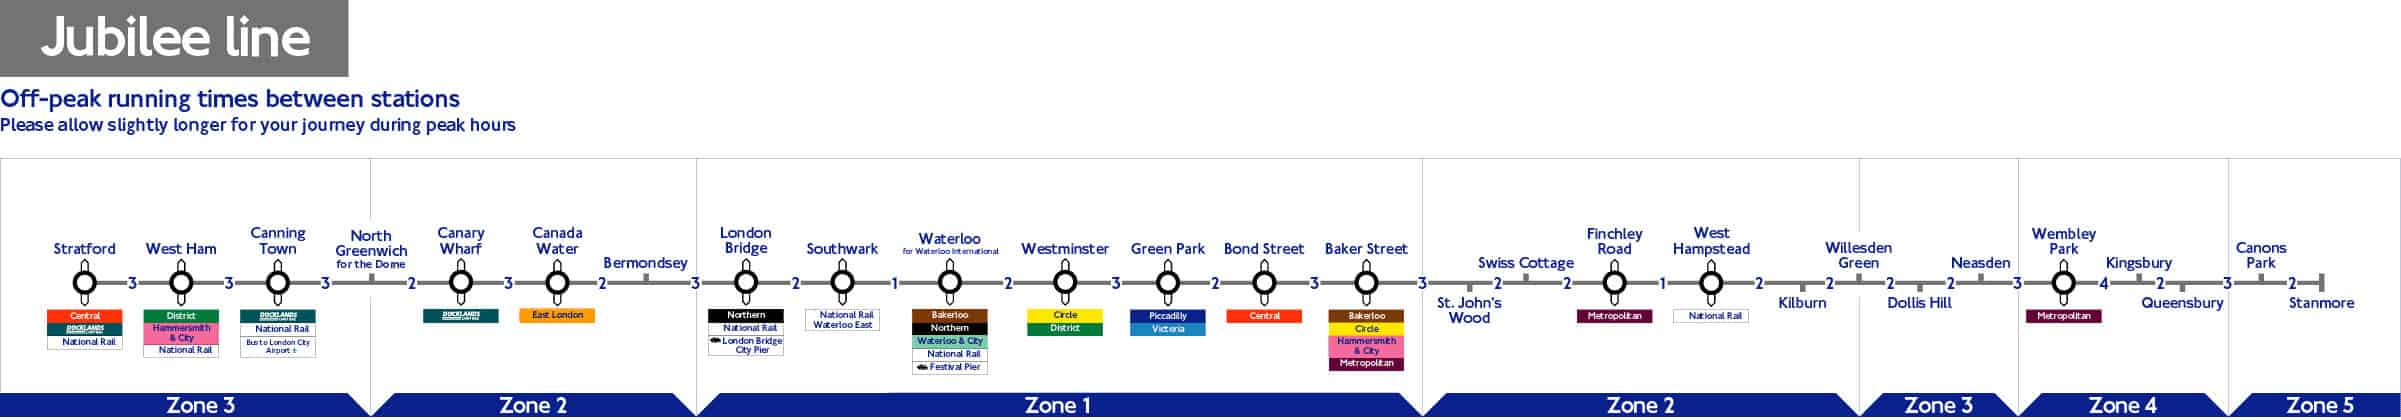 Jubilee Line Map With Zones 